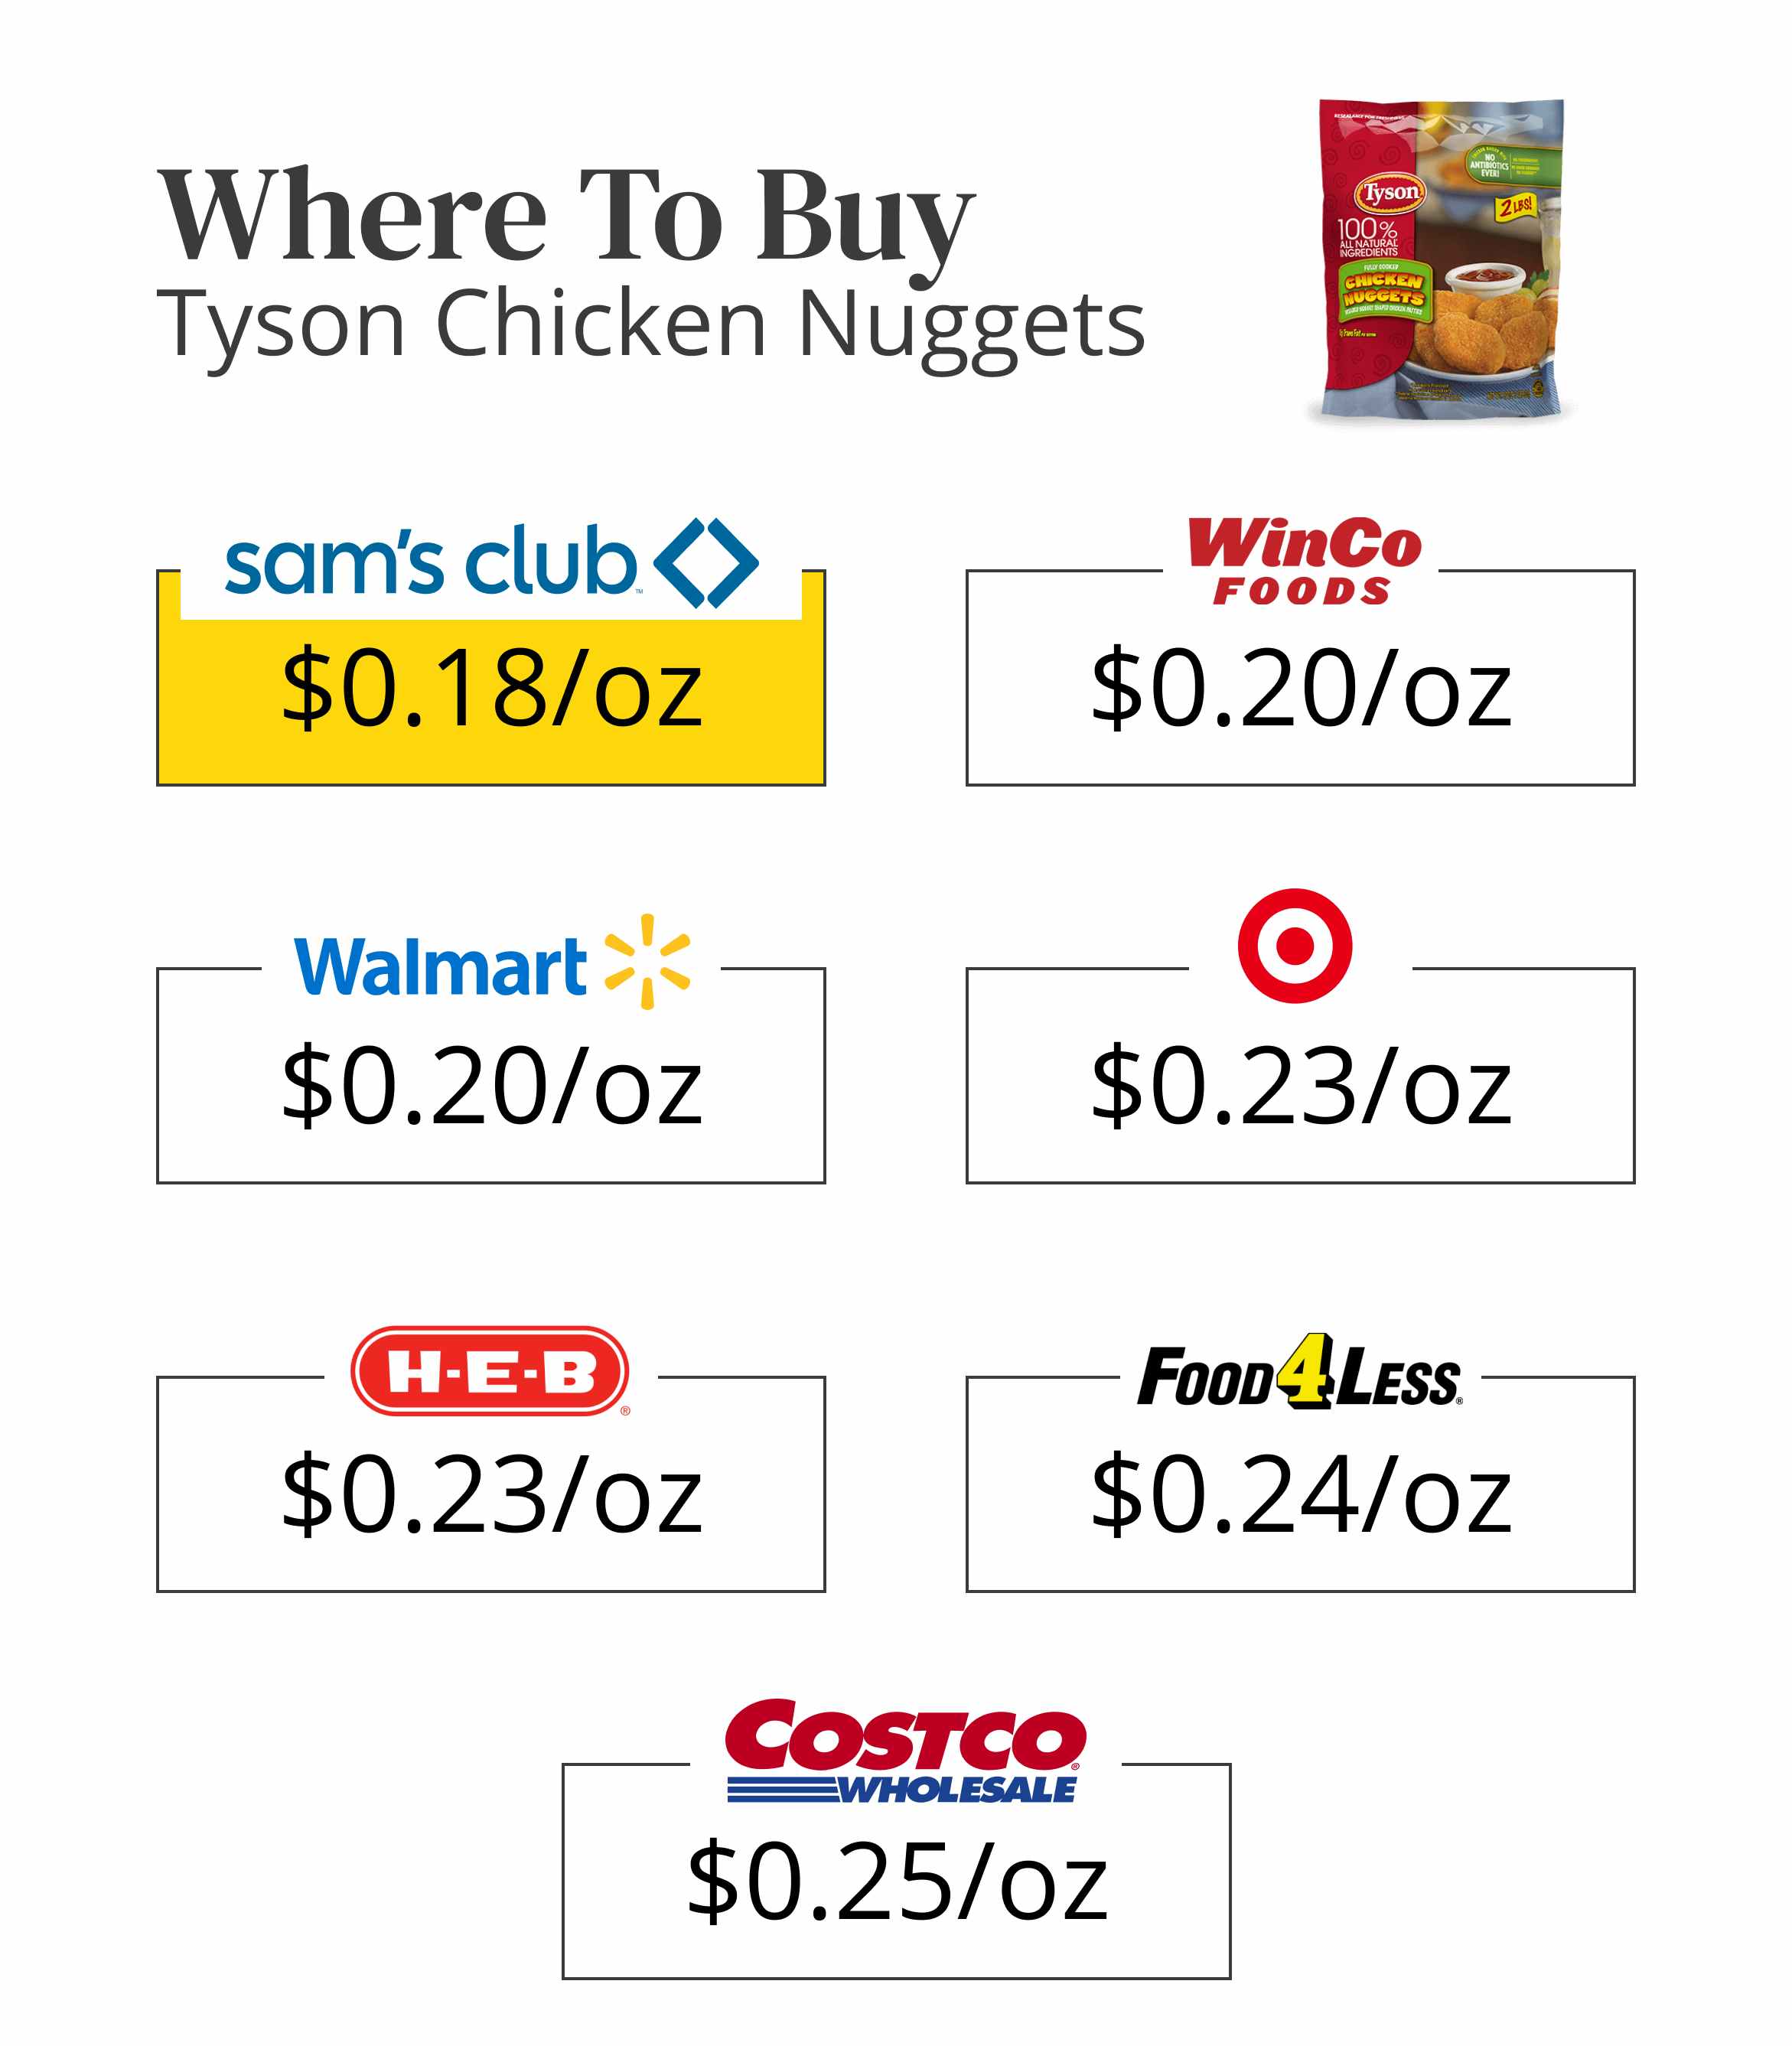 Where to buy frozen Tyson chicken nuggets for the best price.